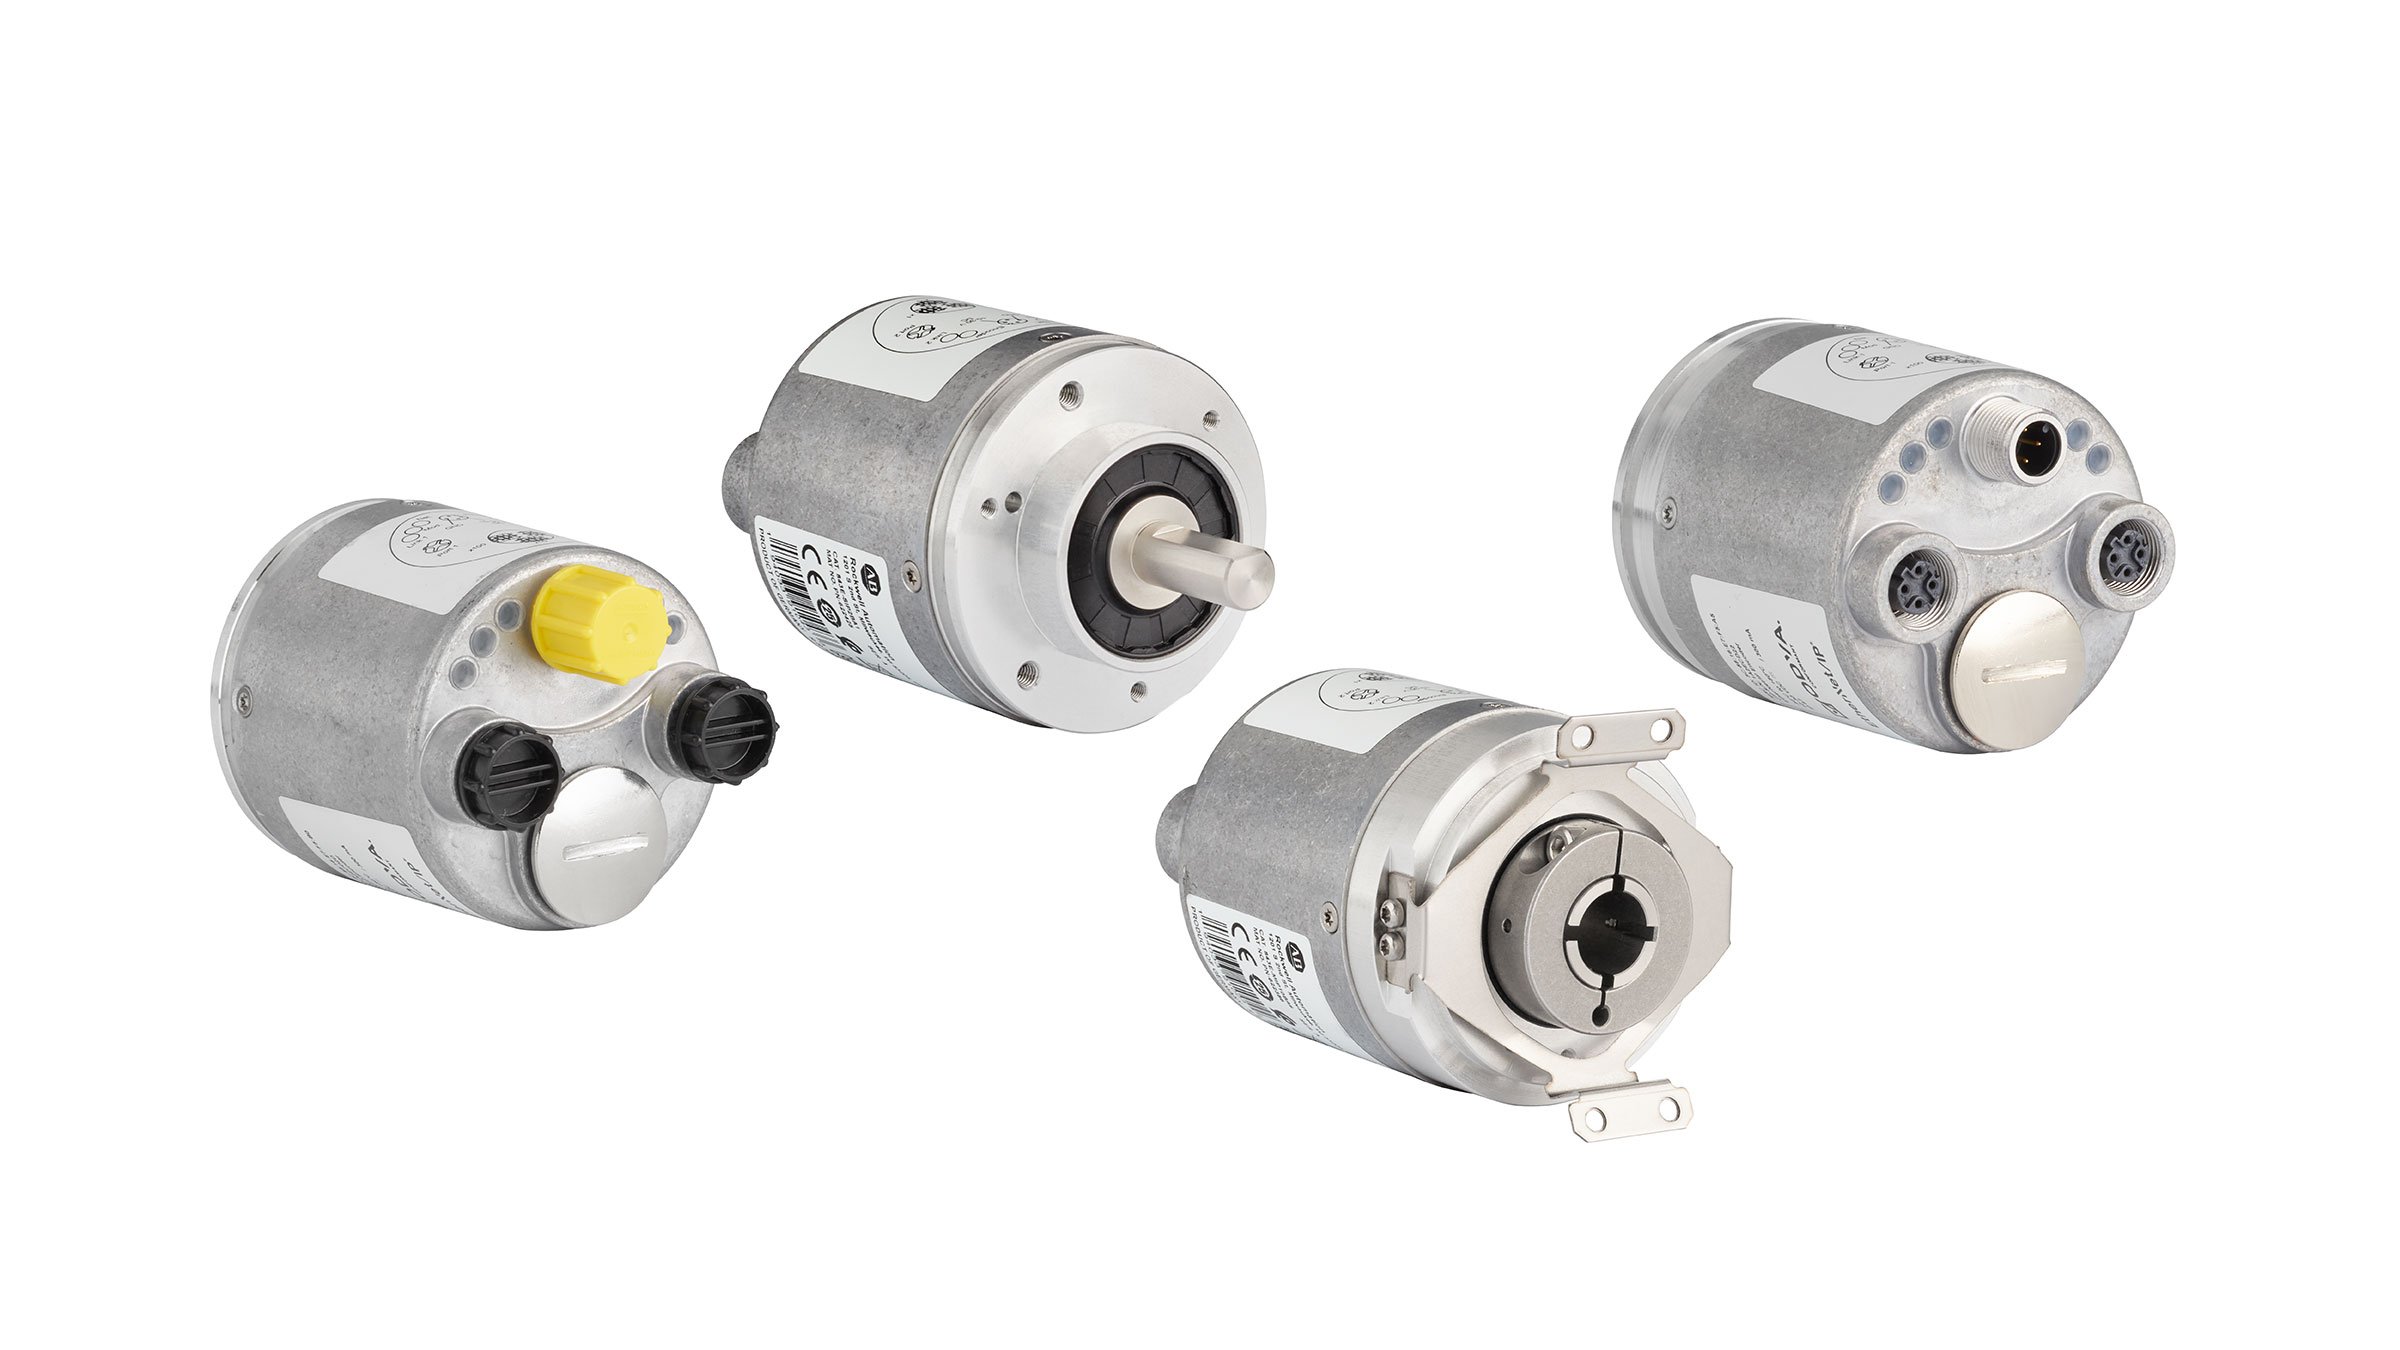 Four 843E Absolute Encoders with EtherNet/IP all made of stainless steel and cylindrical in shape; from left to right: Rear view with four connectors; one with yellow plastic cap (12:00), one with steel conduit cover (6:00), and two with black plastic caps (3:00 and 9:00).  Front view option with solid steel shaft protruding from the center of the face. Front view option with hollow shaft in the center and mounting brackets at 12:00 and 6:00. Rear view with four connectors; one 12 mm micro male connector (12:00), one with steel conduit cover (6:00), and two 12 mm micro female connectors (3:00 and 9:00).